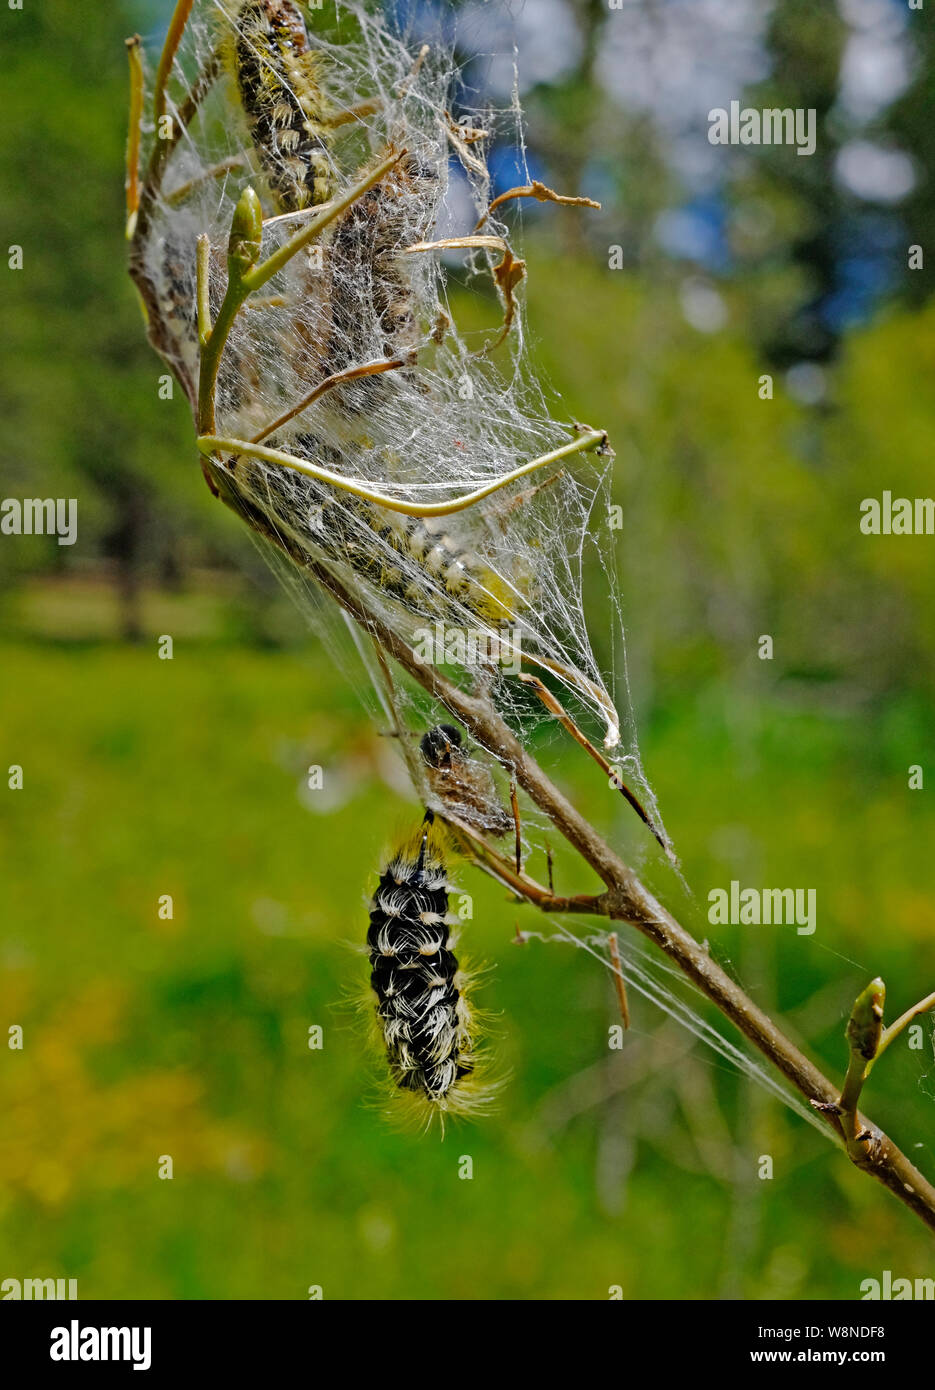 Caterpillars and pupae of the white satin moth,  in silk cocoons, on an aspen tree in the Oregon Cascade Mountains. Stock Photo